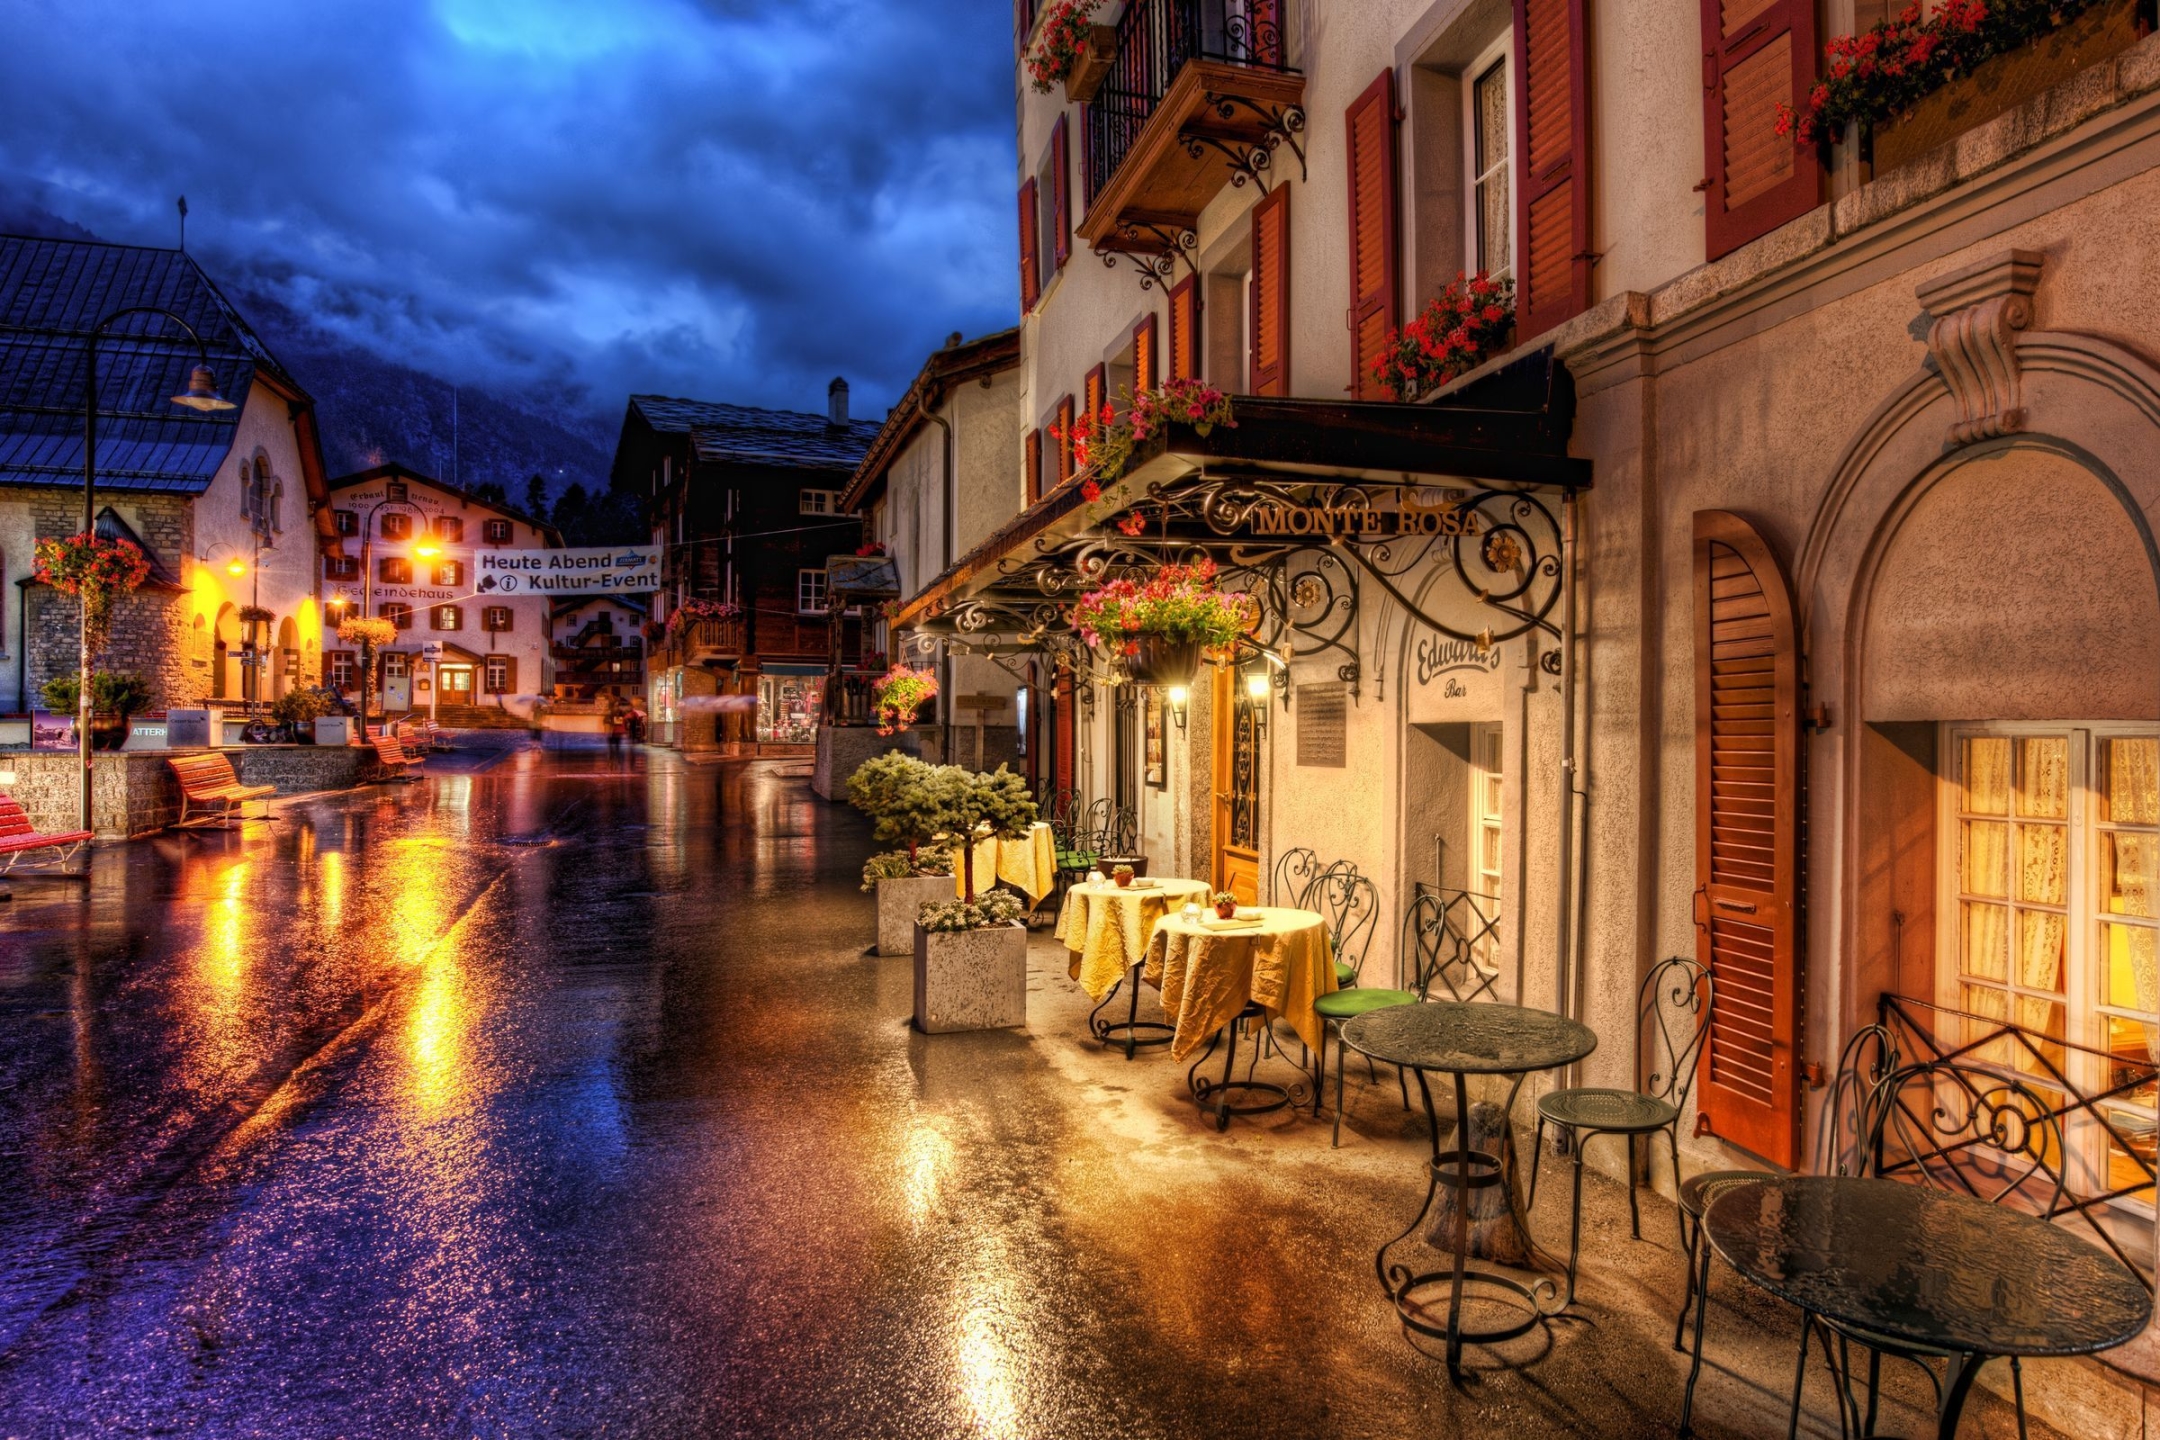 photography, place, road, zermatt, switzerland, hdr, town, building wallpaper for mobile